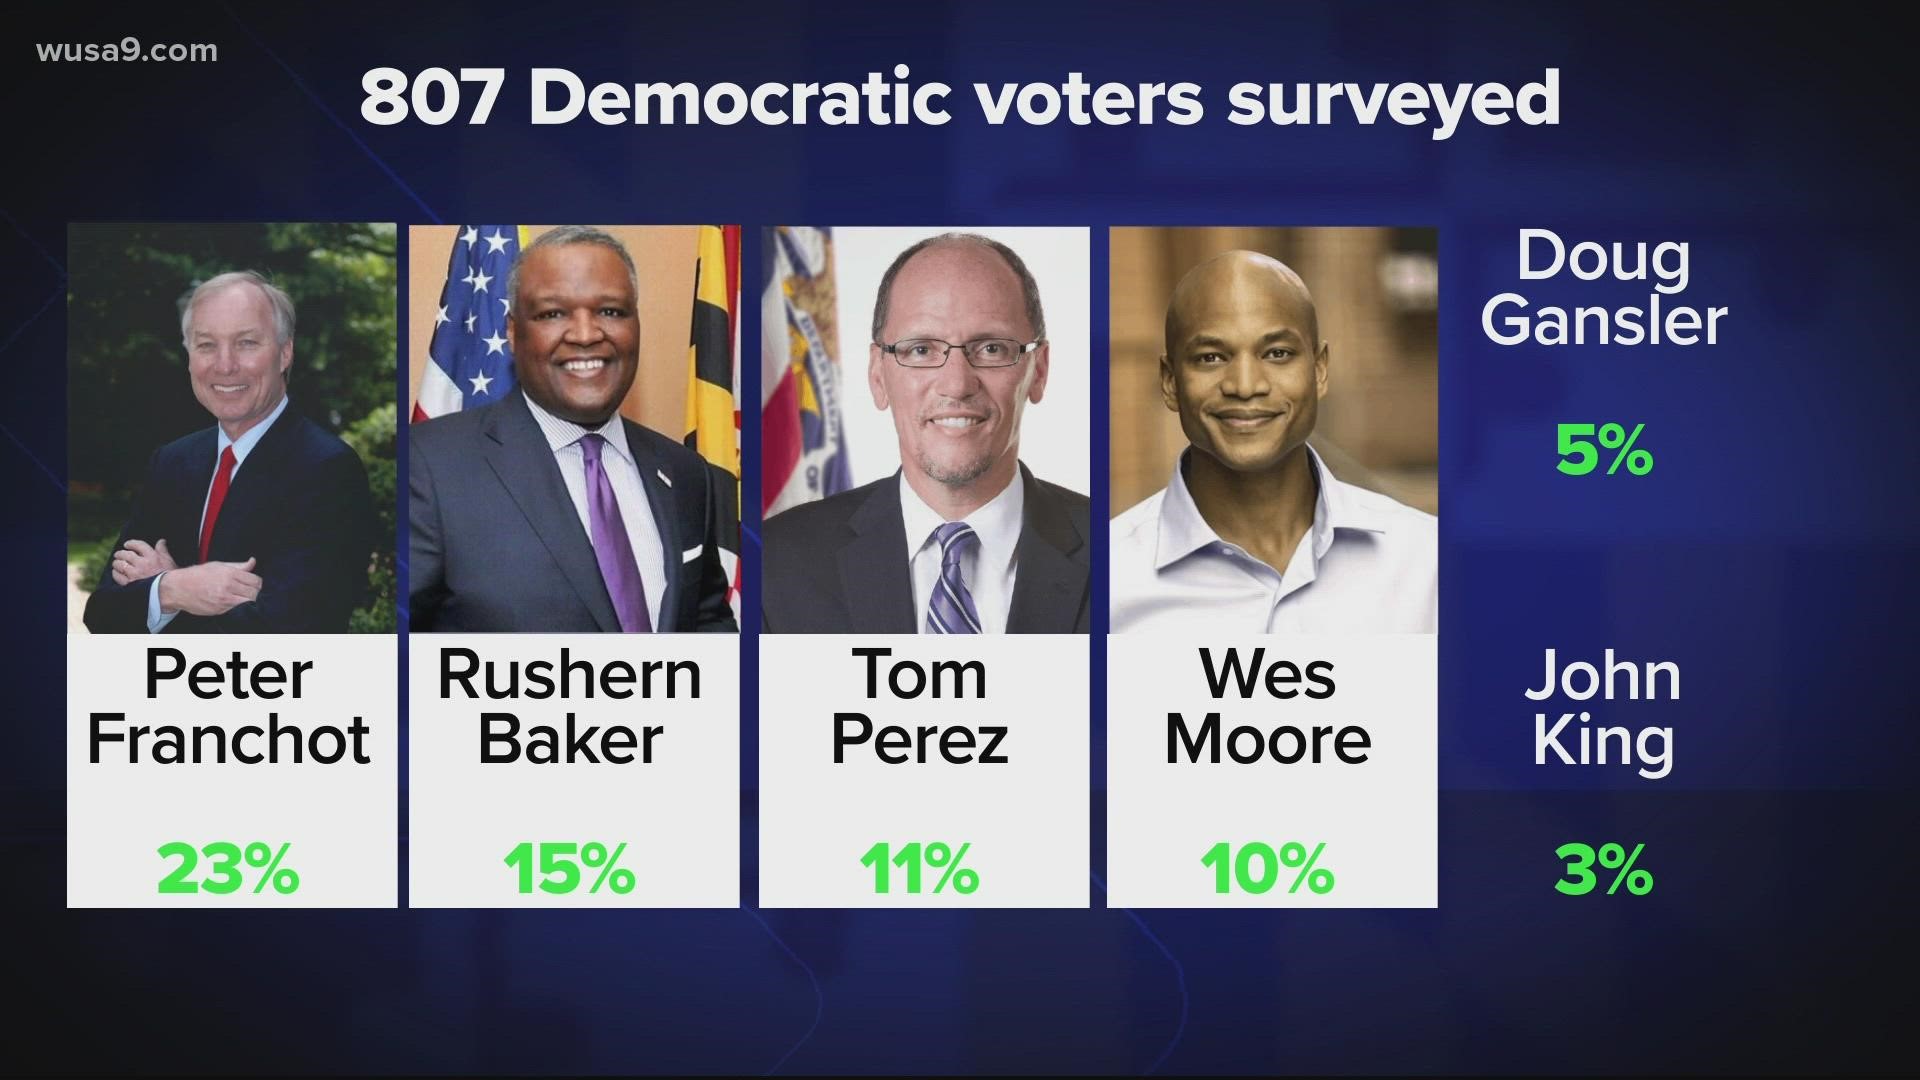 New polling shows all of the Democratic candidates in Maryland's gubernatorial race have a real chance of winning the nomination.